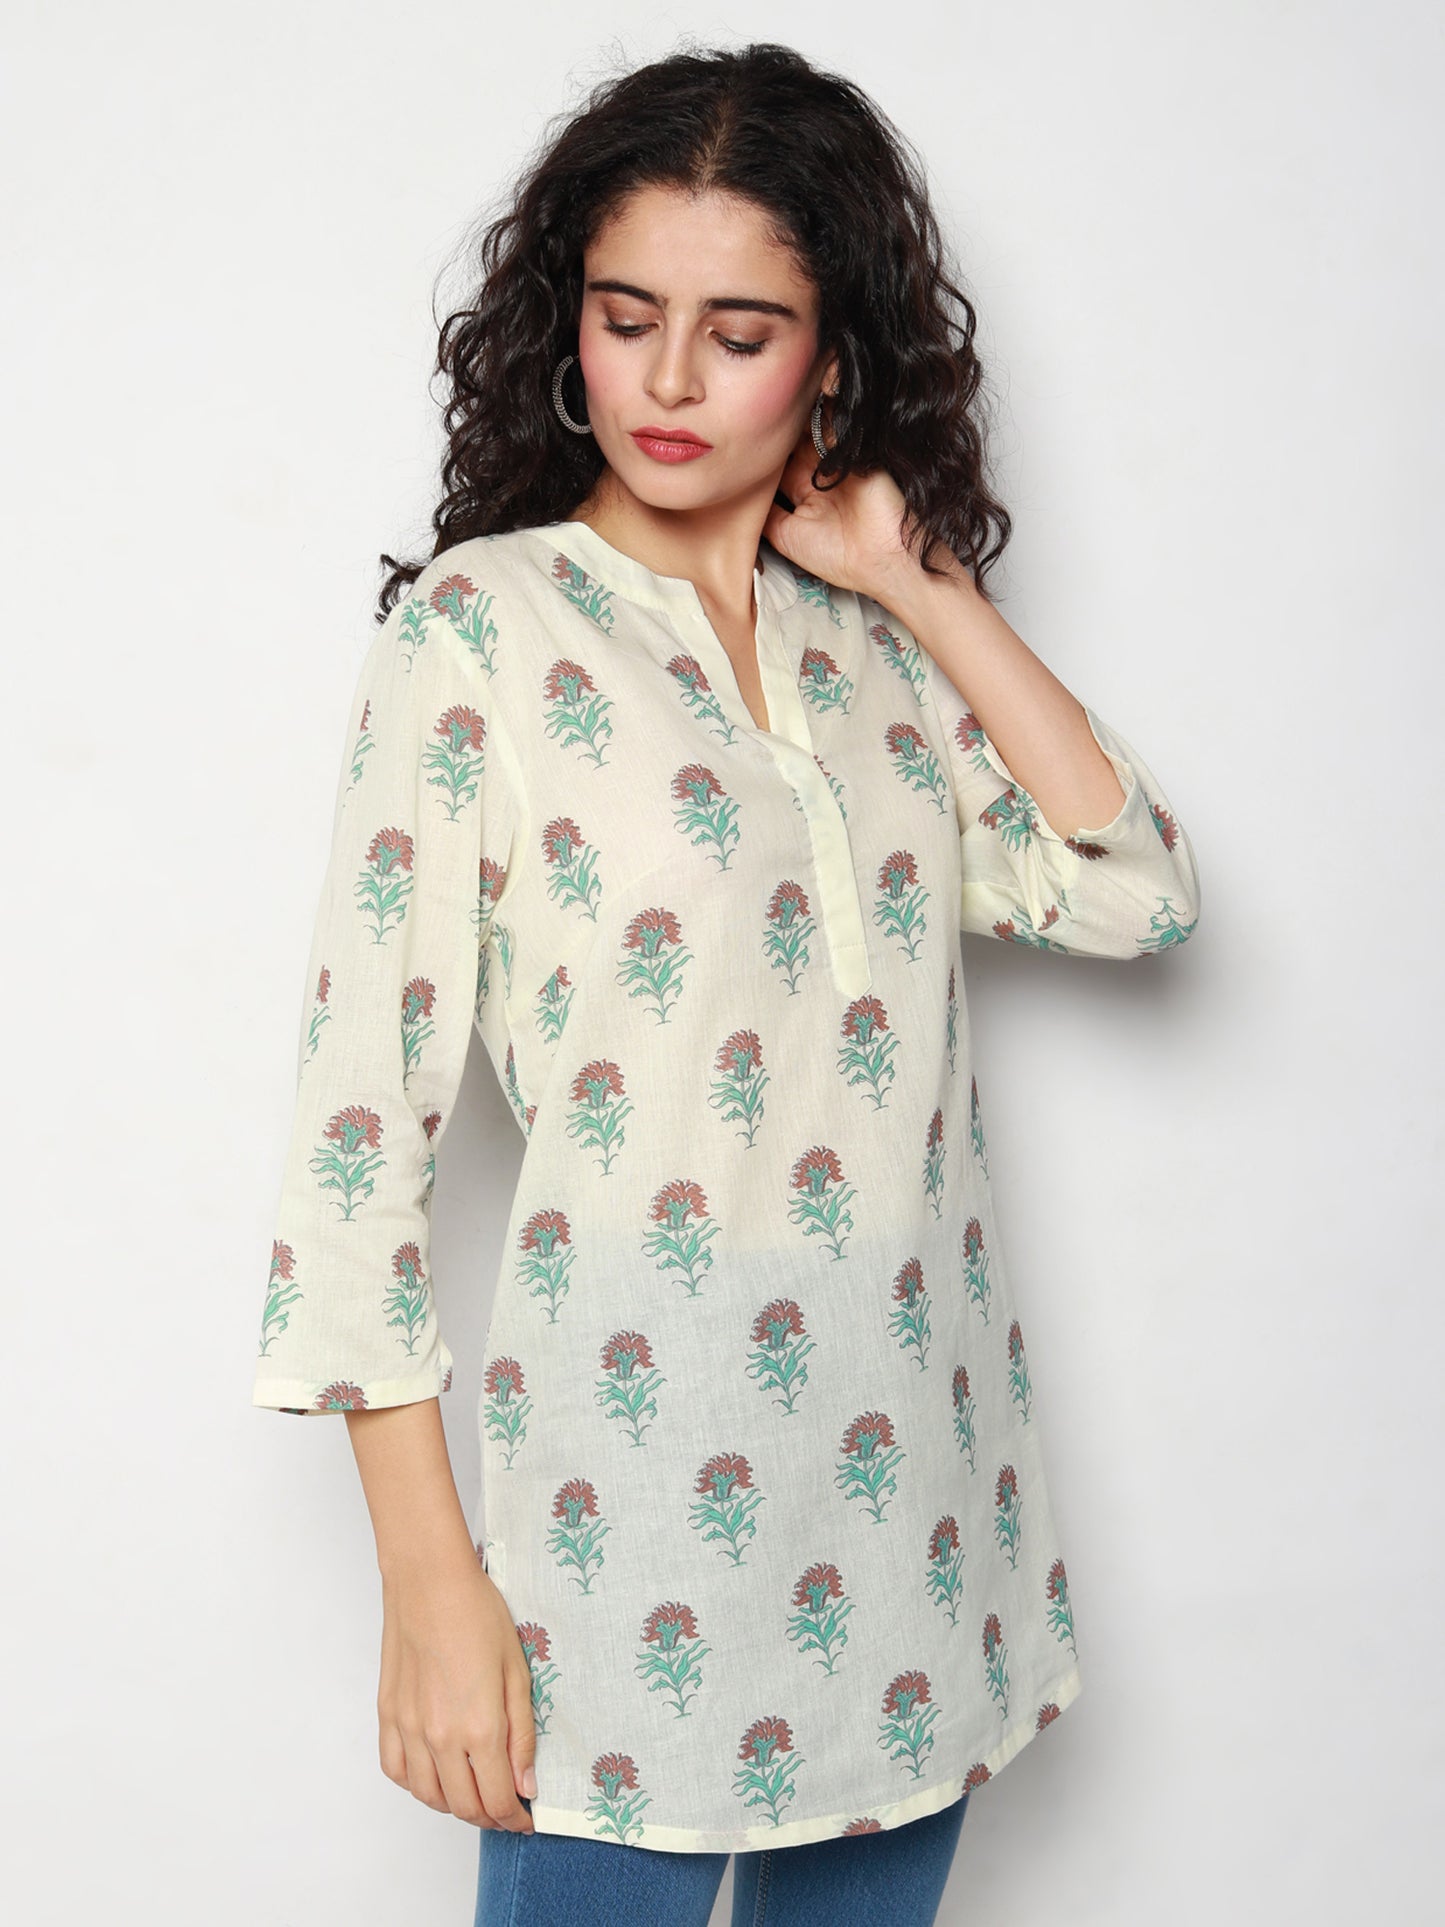 
                  
                    Ivory Cotton Tunic with Floral Block Prints
                  
                